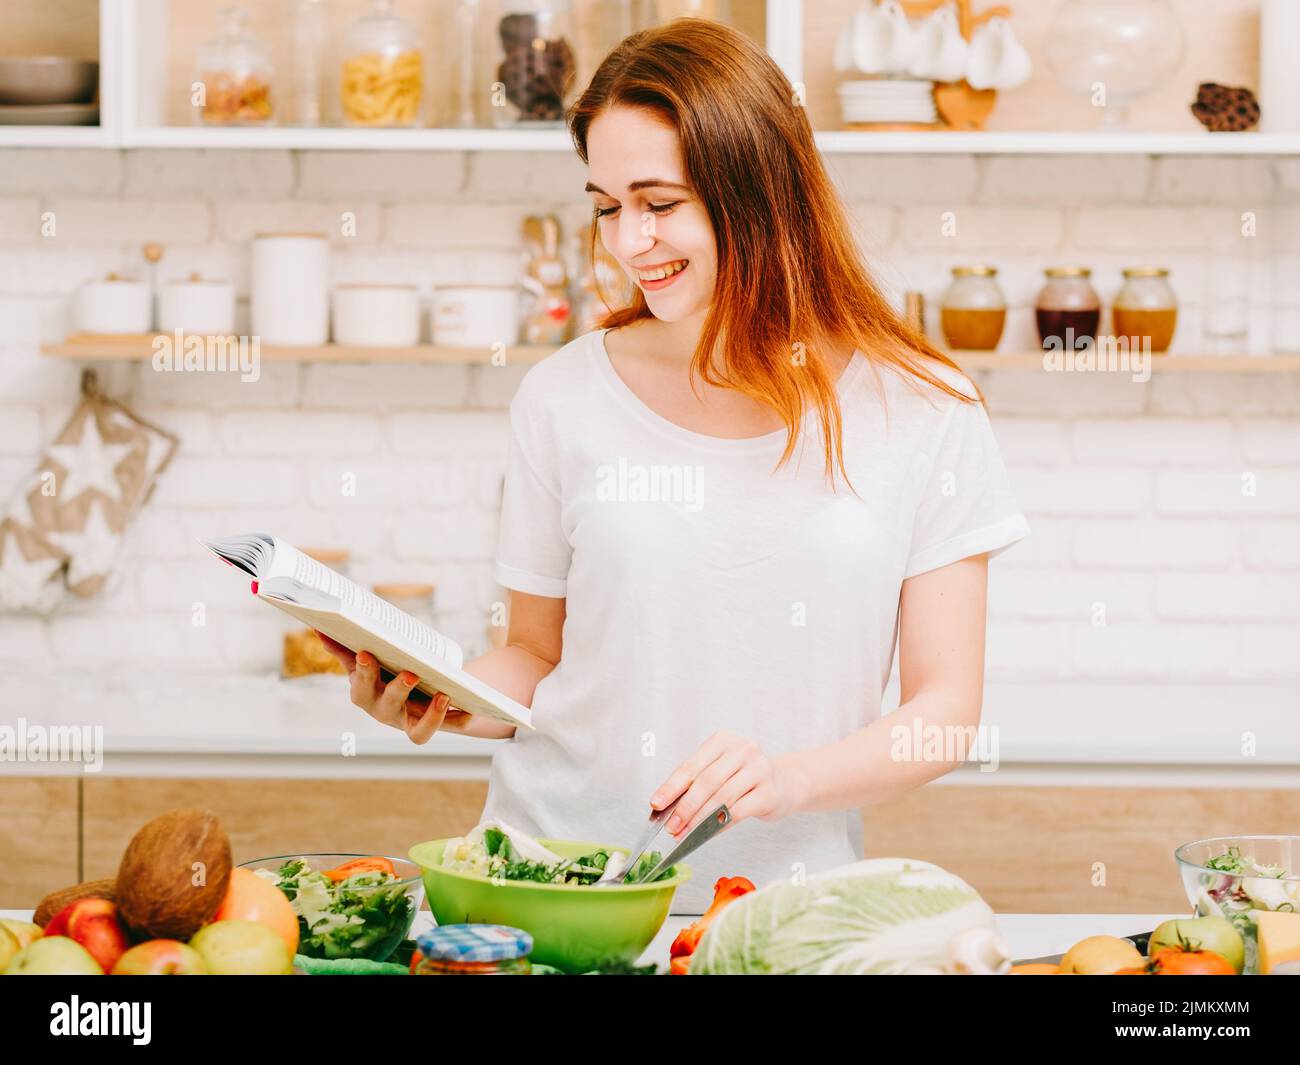 cooking hobby fun home leisure woman kitchen Stock Photo